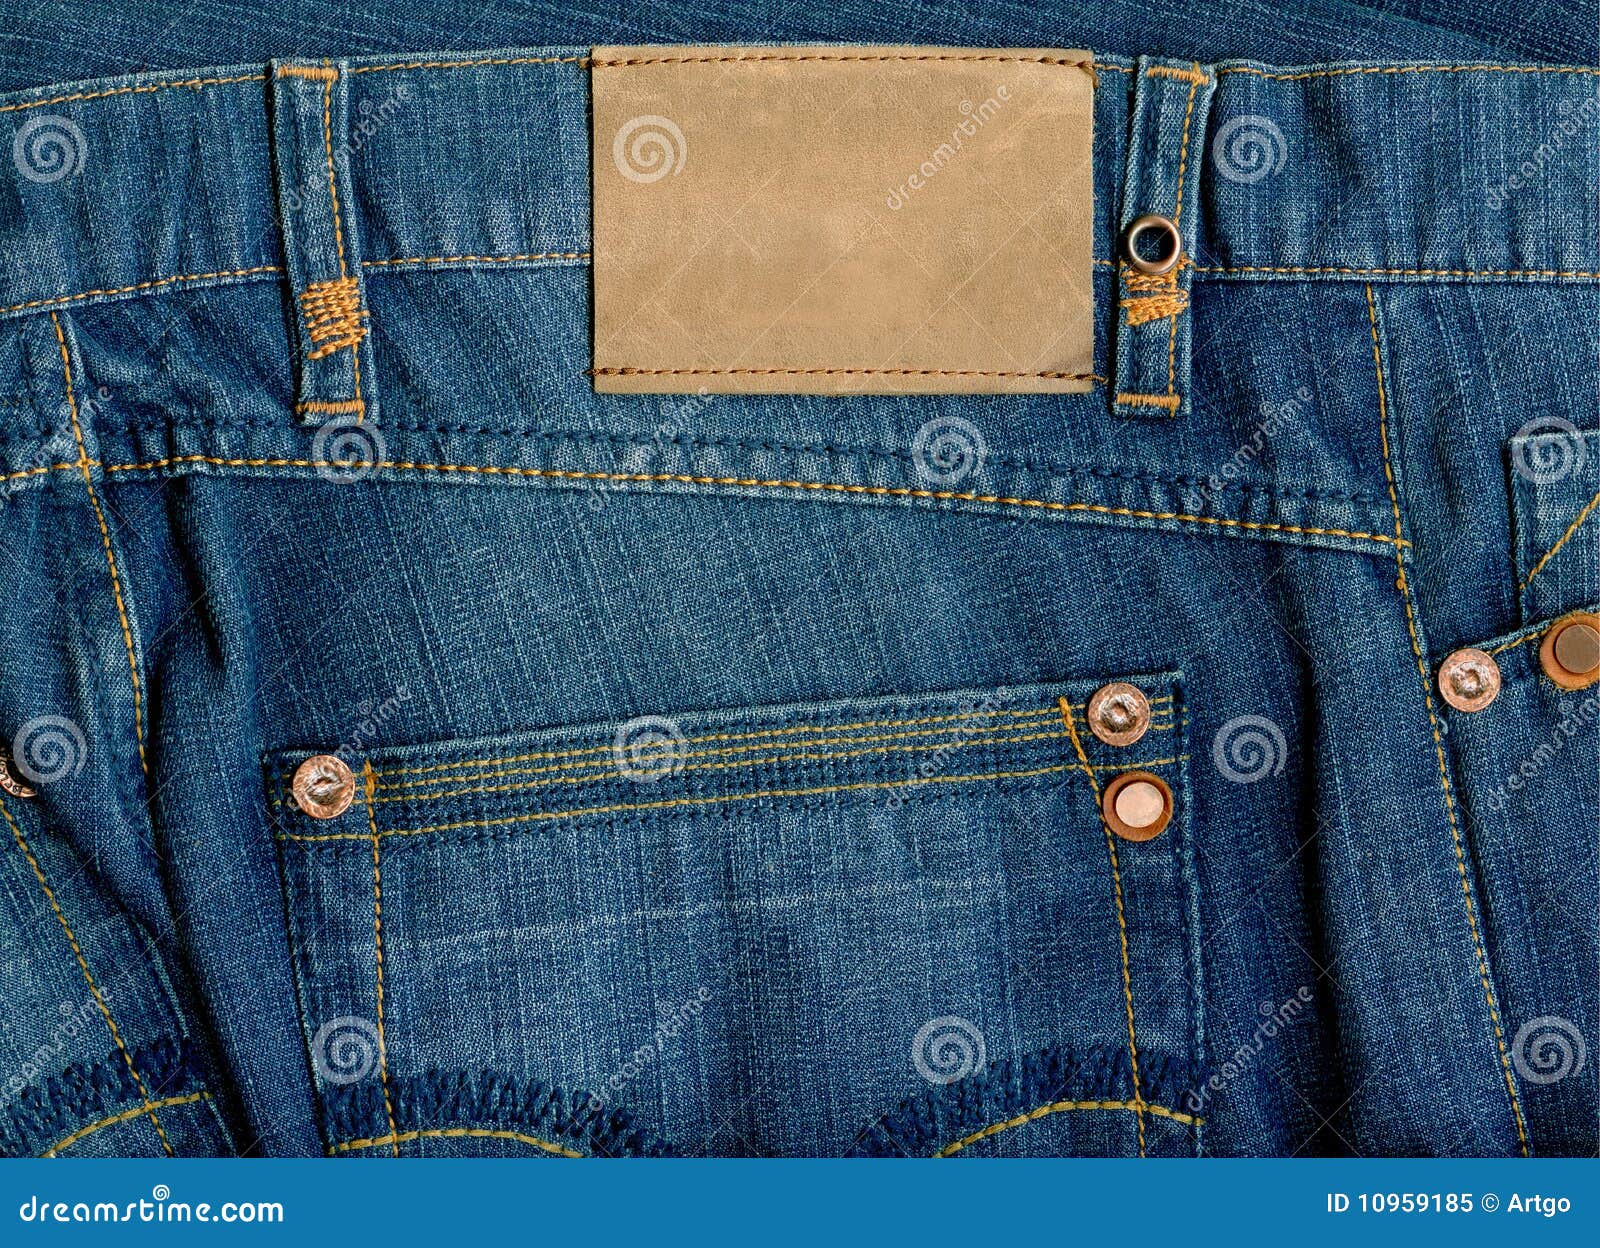 Fragment of Jeans with Pure Label for Your Text. Stock Image - Image of ...